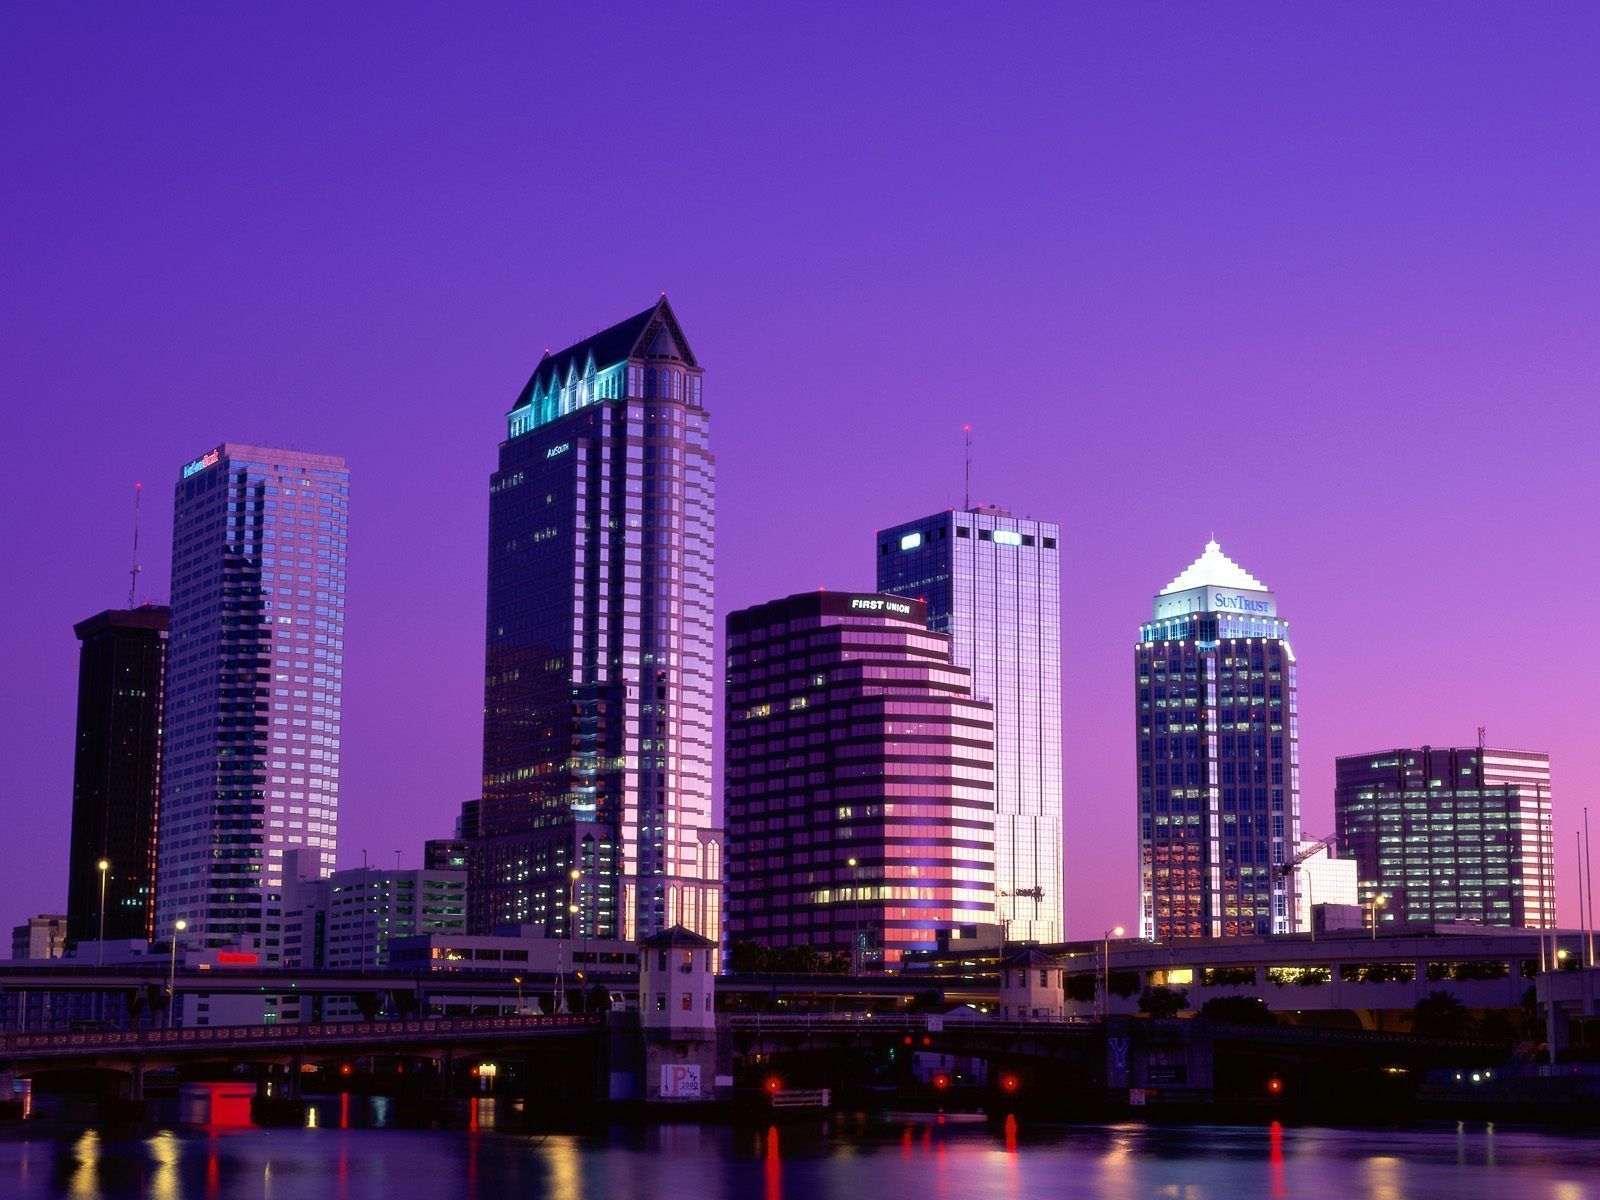 Tampa buildings by night, Florida - 1600x1200 - Wallpaper #1914 on ...